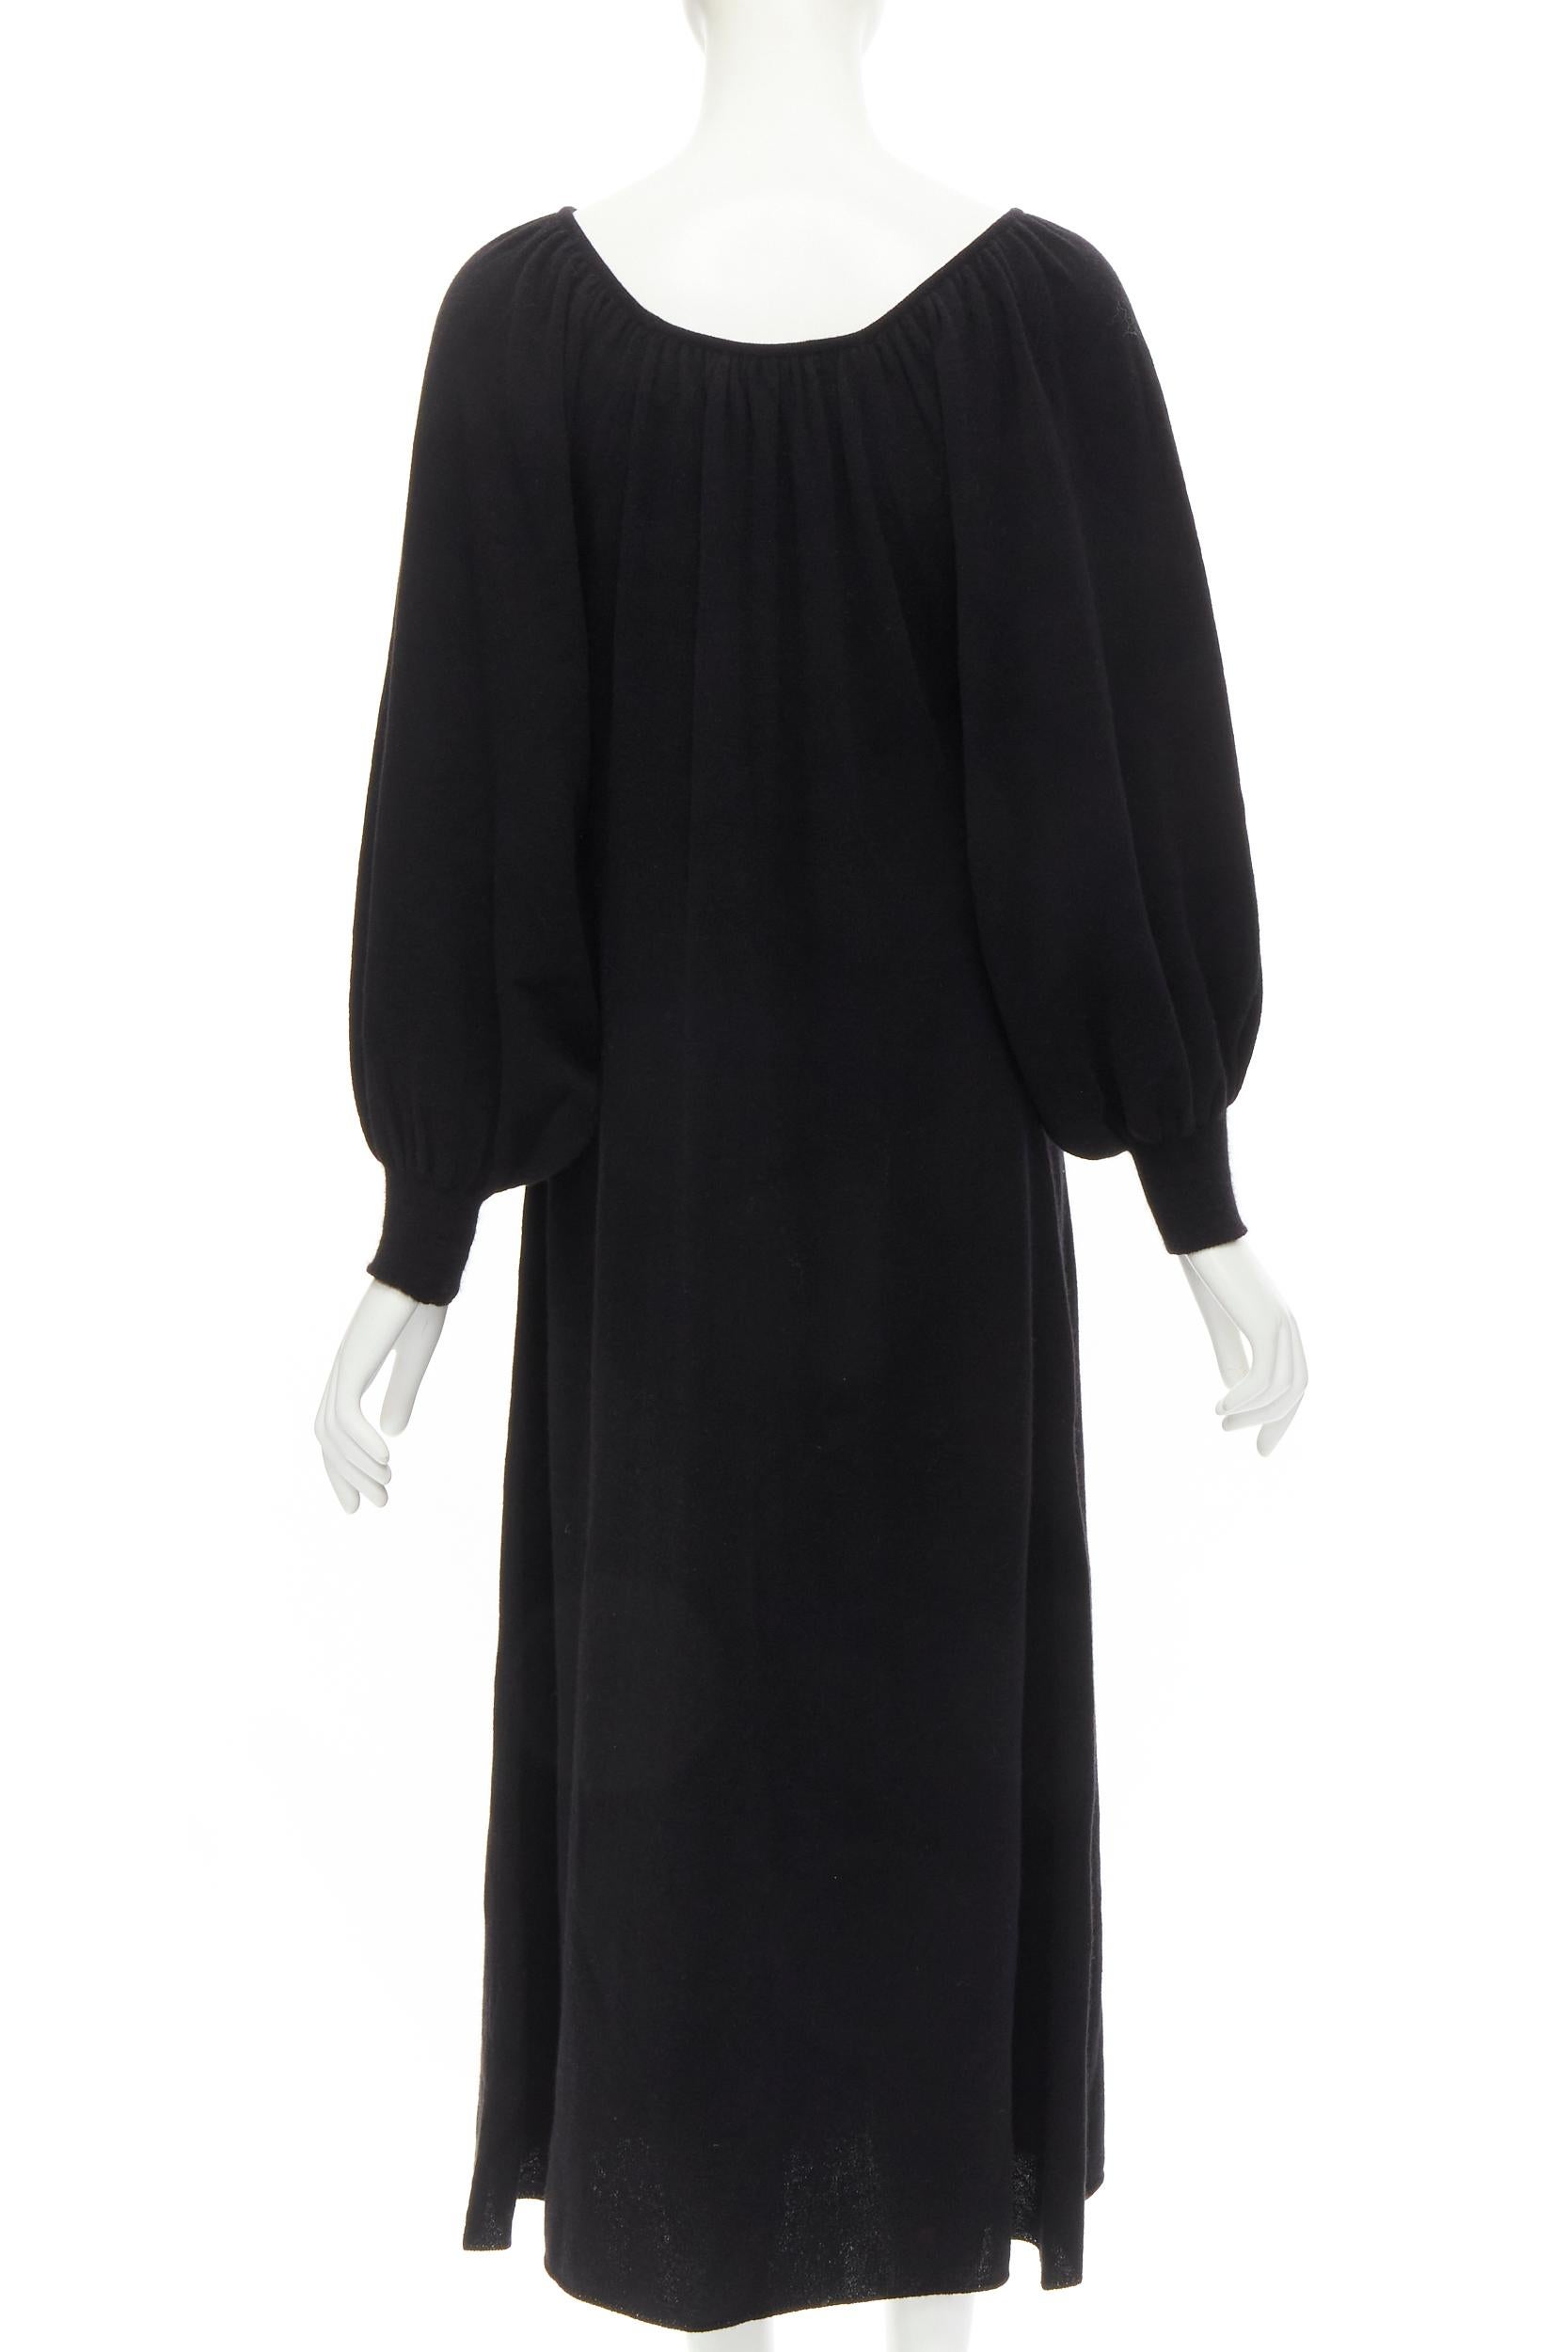 RYAN ROCHE 100% cashmere black pleated collar bubble sleeve midi dress S In Excellent Condition For Sale In Hong Kong, NT